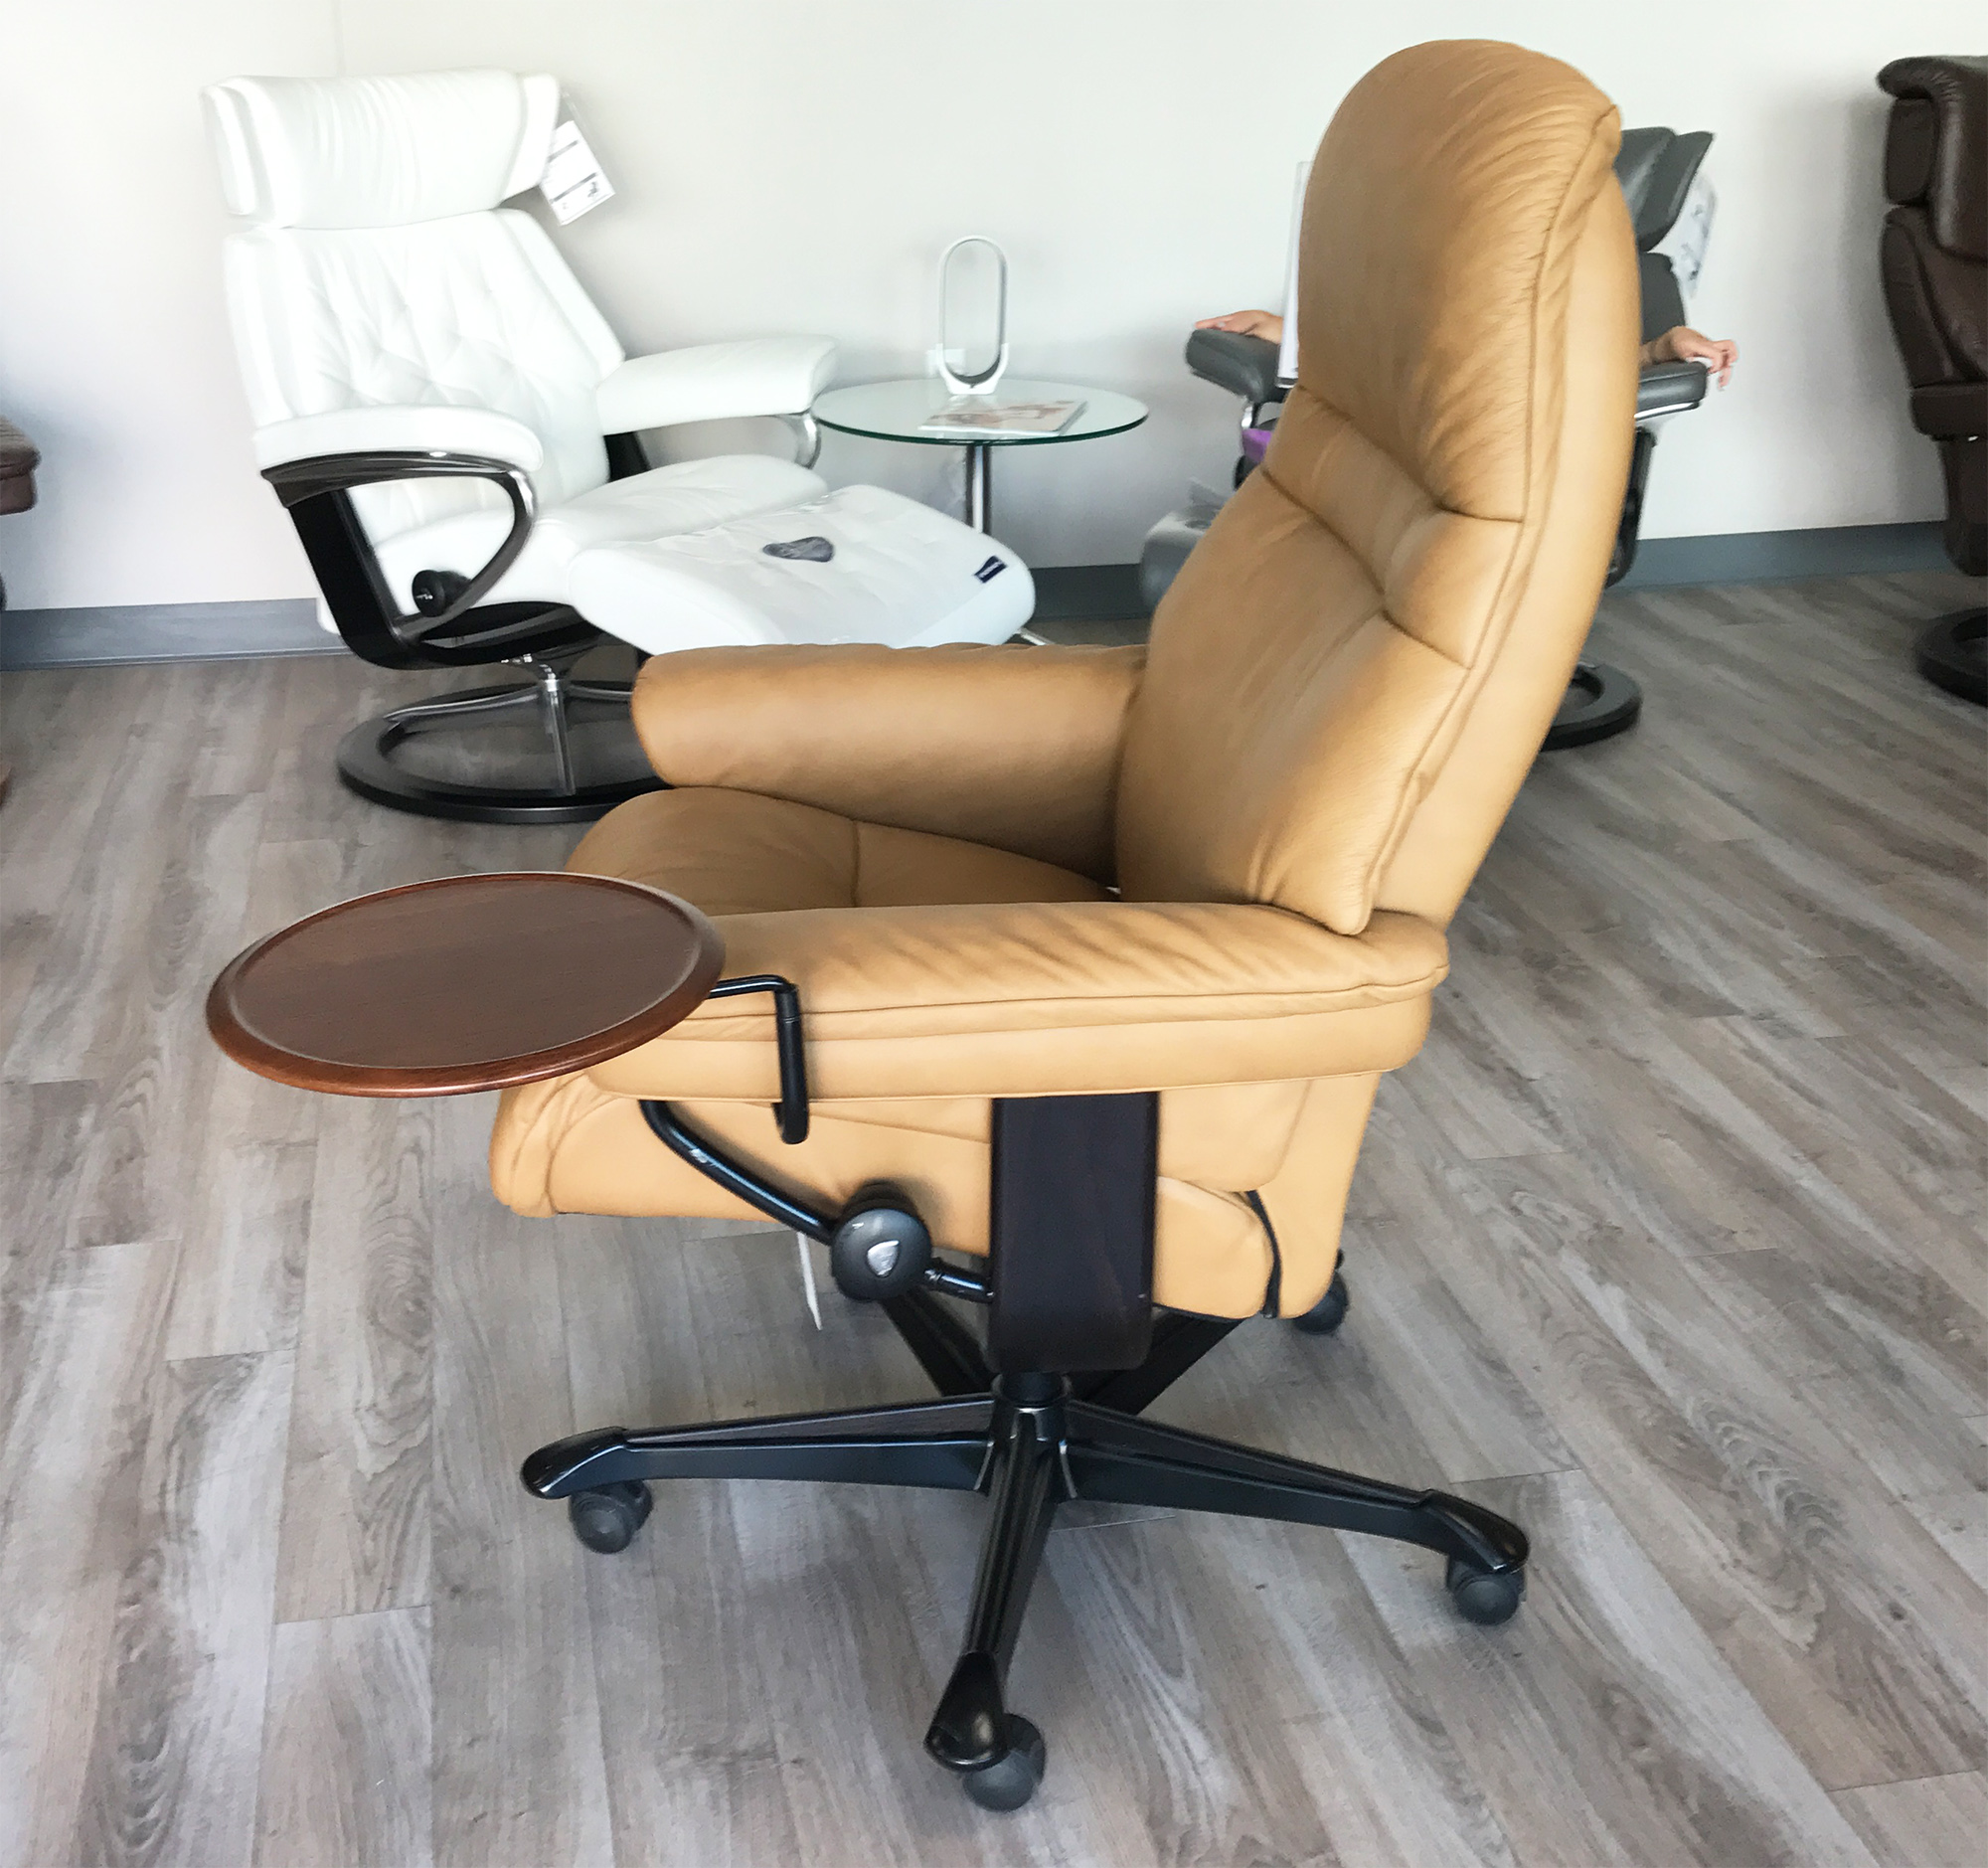 Stressless Sunrise Office Desk Chair Paloma Taupe Leather by Ekornes